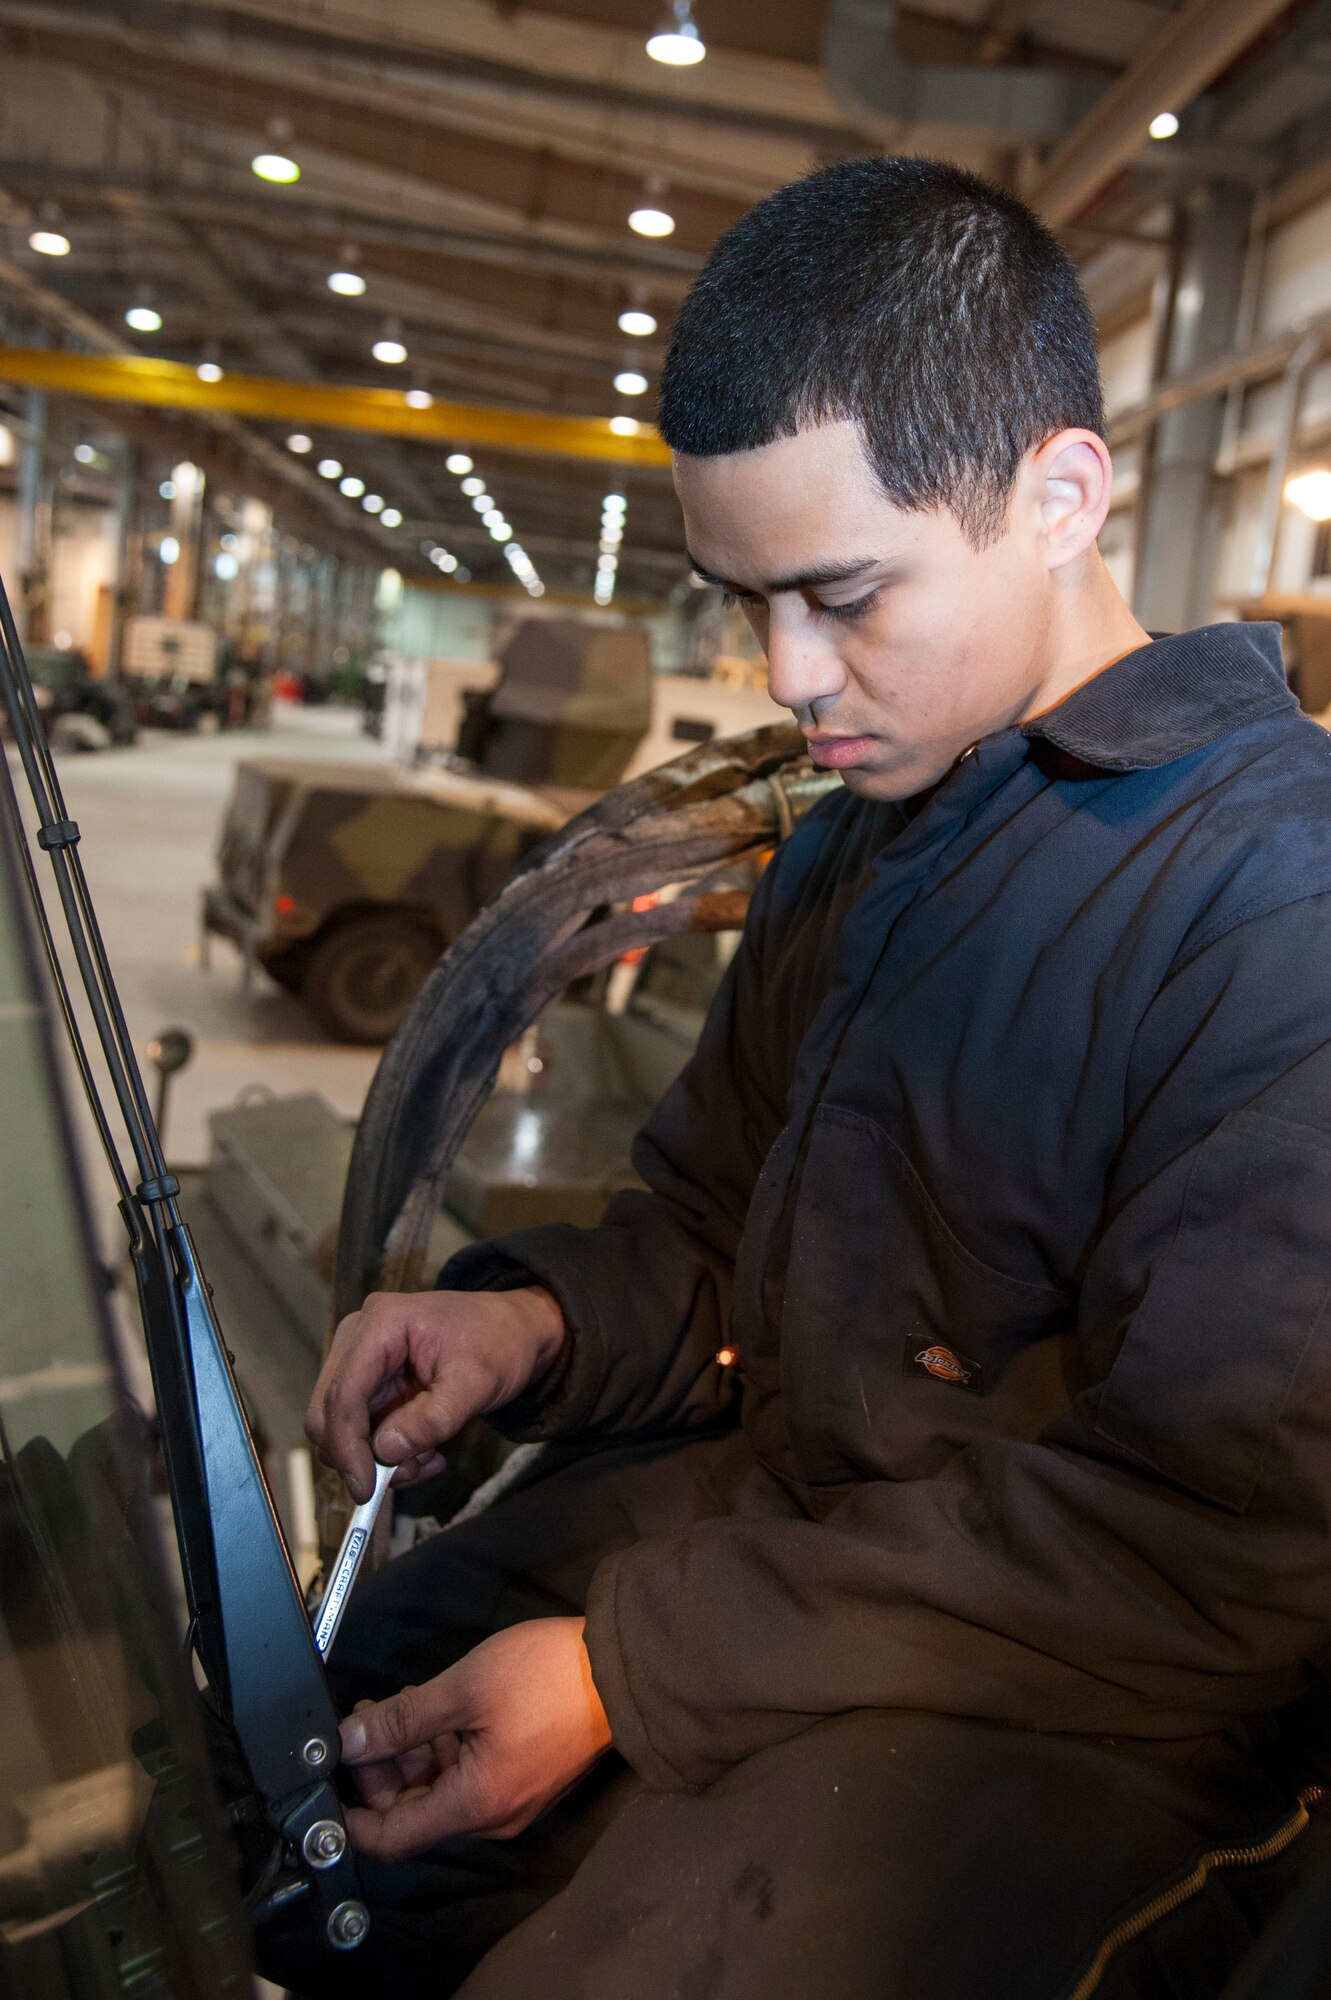 Senior Airman Gianni Sanchez, 51st Logistics Readiness Squadron vehicle mechanic, reattaches windshield wipers at Osan Air Base, Republic of Korea, Dec. 22, 2014. This type of maintenance is done by the customer service section of vehicle maintenance. (U.S. Air Force photo by Senior Airman Matthew Lancaster)